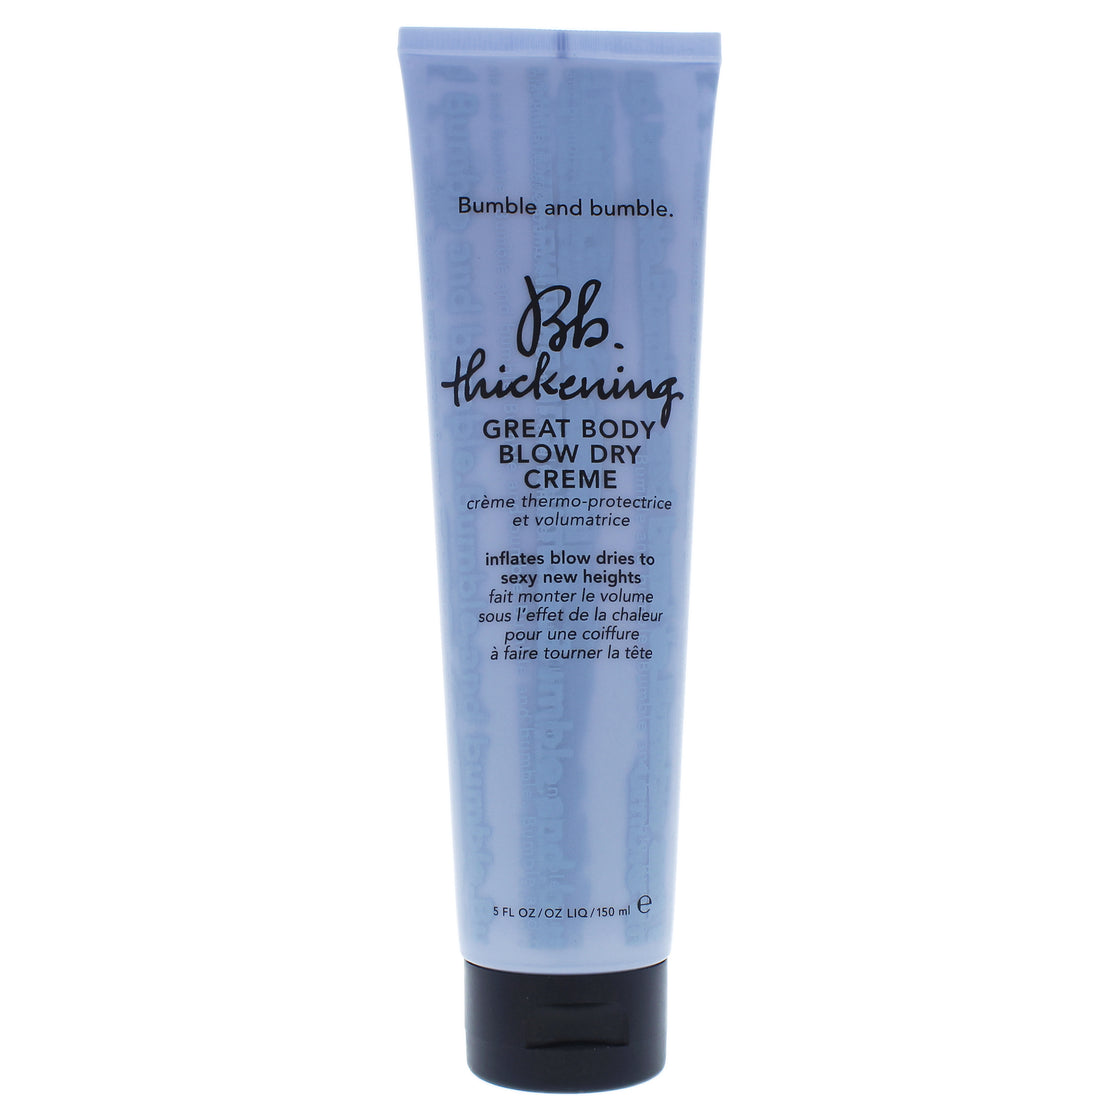 Thickening Great Body Blow Dry Creme by Bumble and Bumble for Unisex - 5 oz Cream